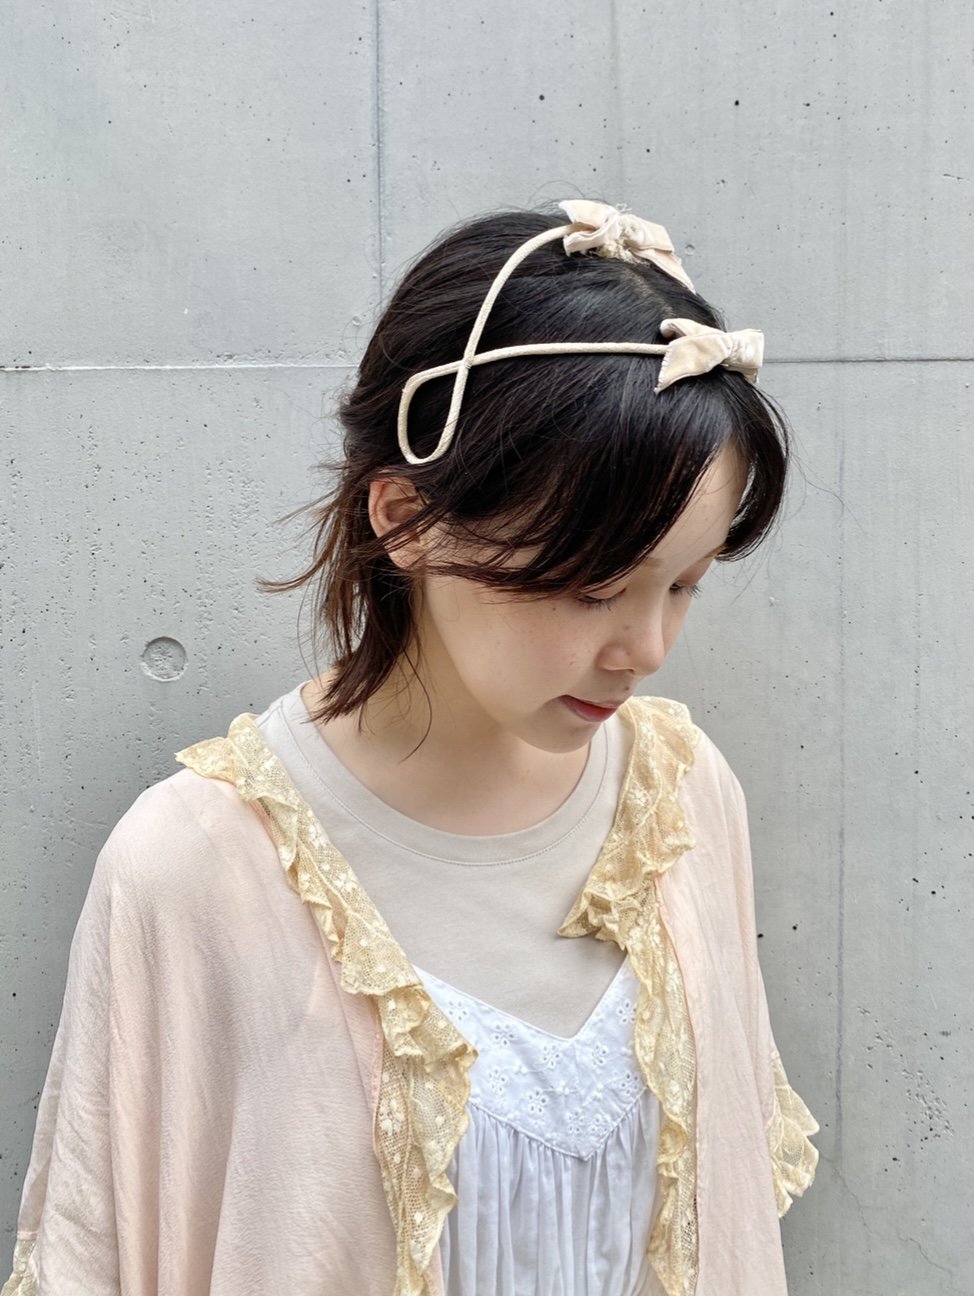 <img class='new_mark_img1' src='https://img.shop-pro.jp/img/new/icons20.gif' style='border:none;display:inline;margin:0px;padding:0px;width:auto;' />《SALE》double ribbon head dress